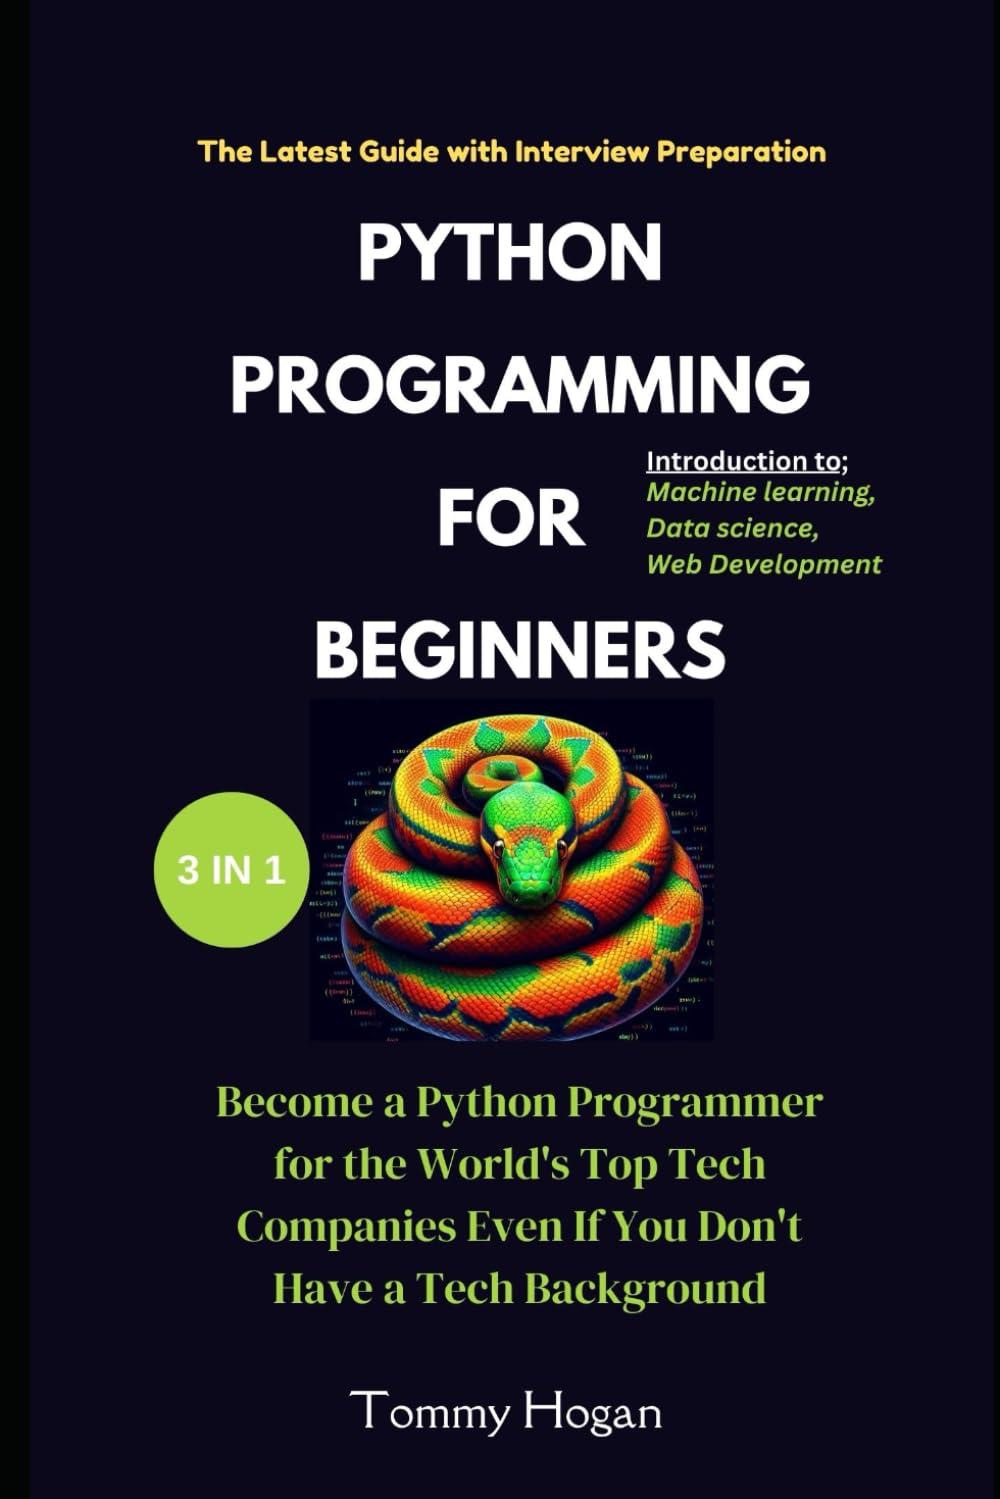 python programming for beginners become a python programmer for the world's top tech companies even if you